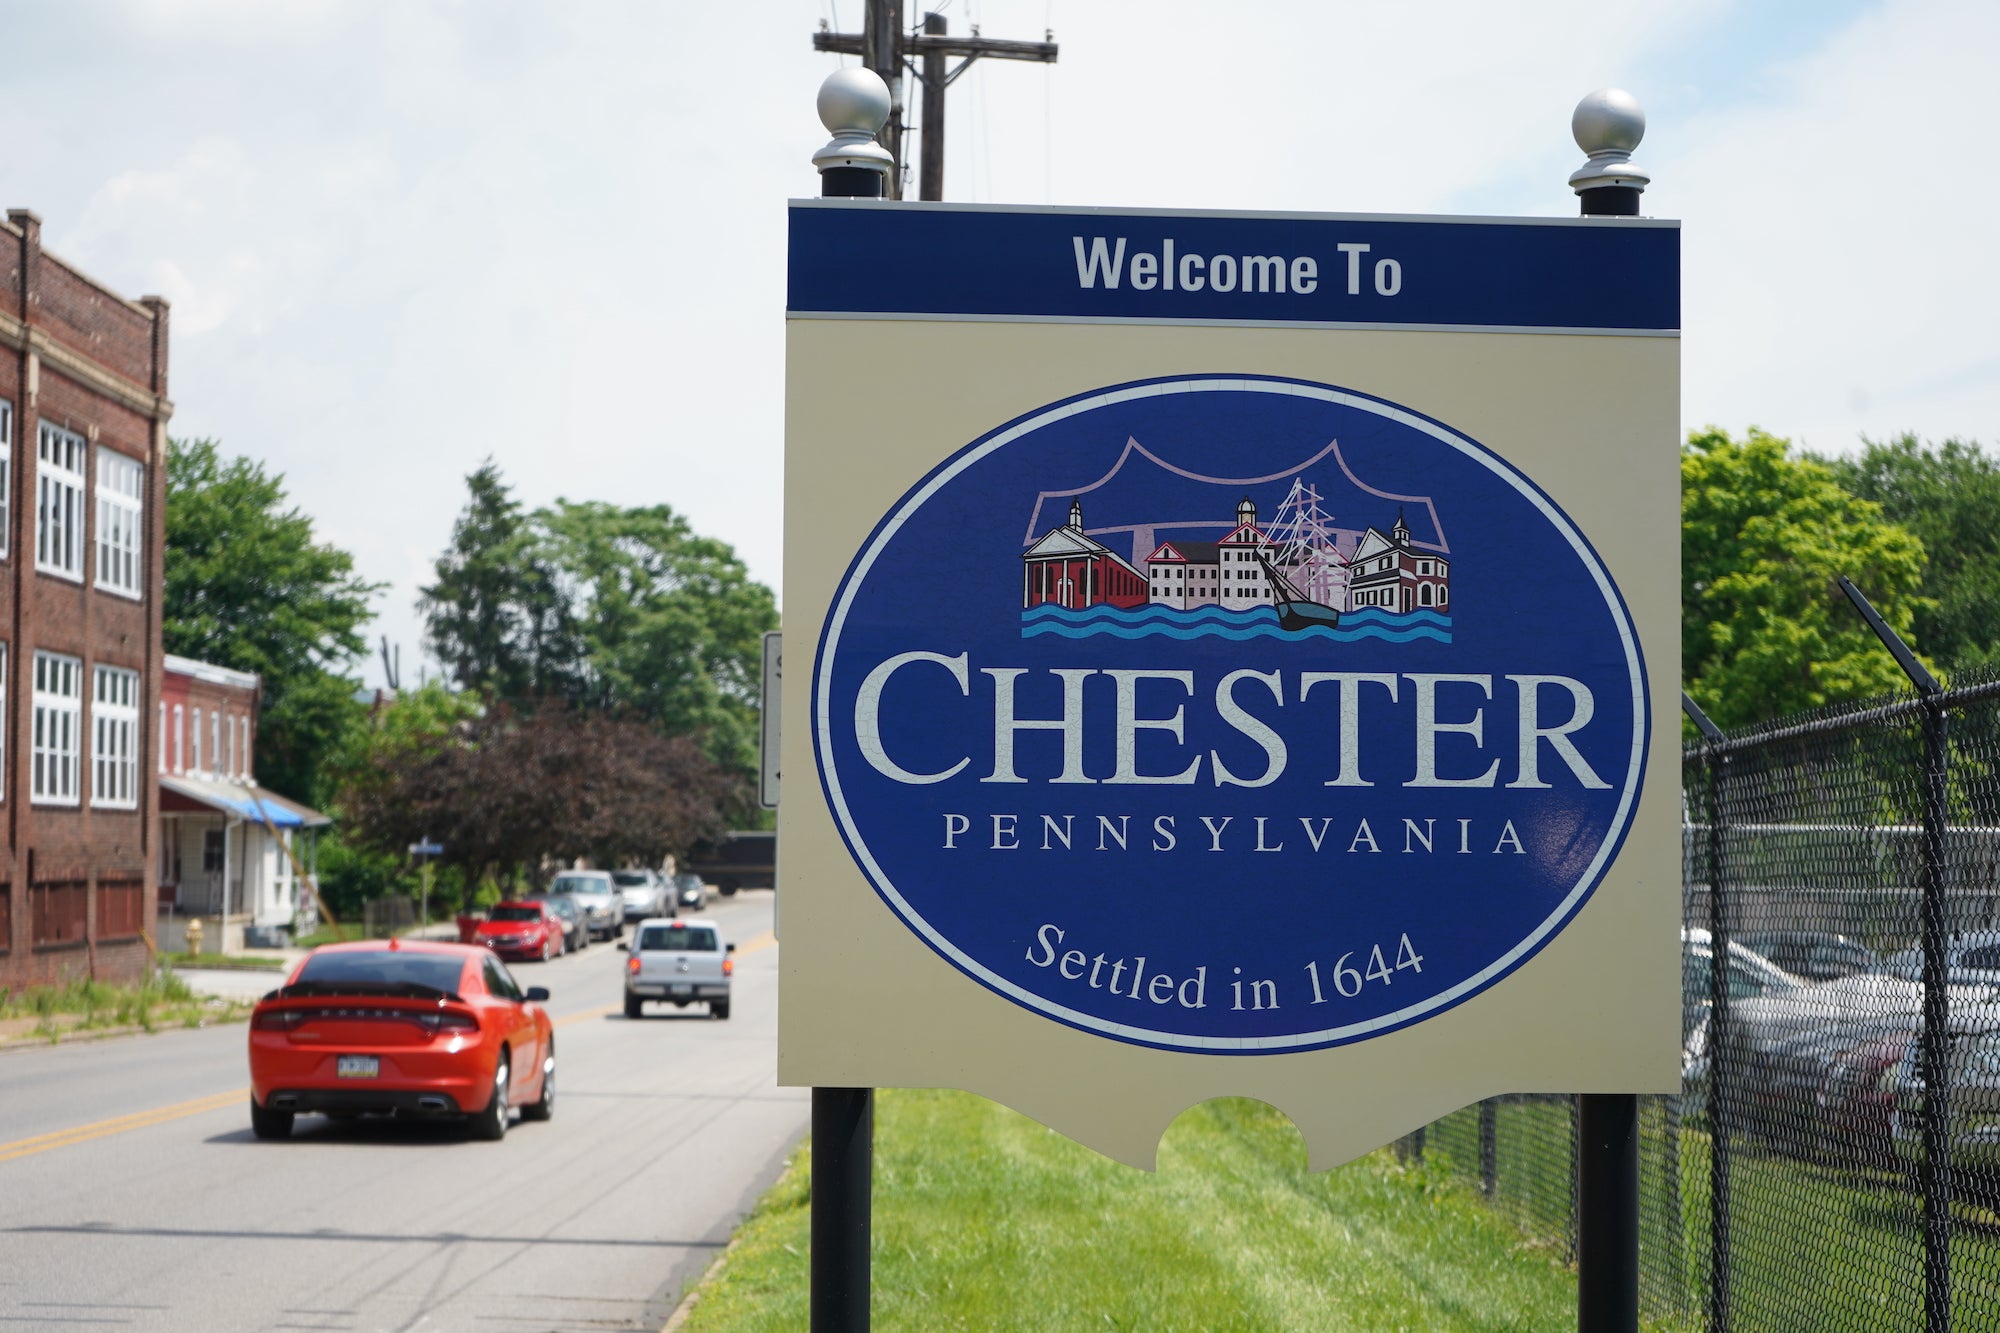 Chester eyed for site of major LNG export terminal